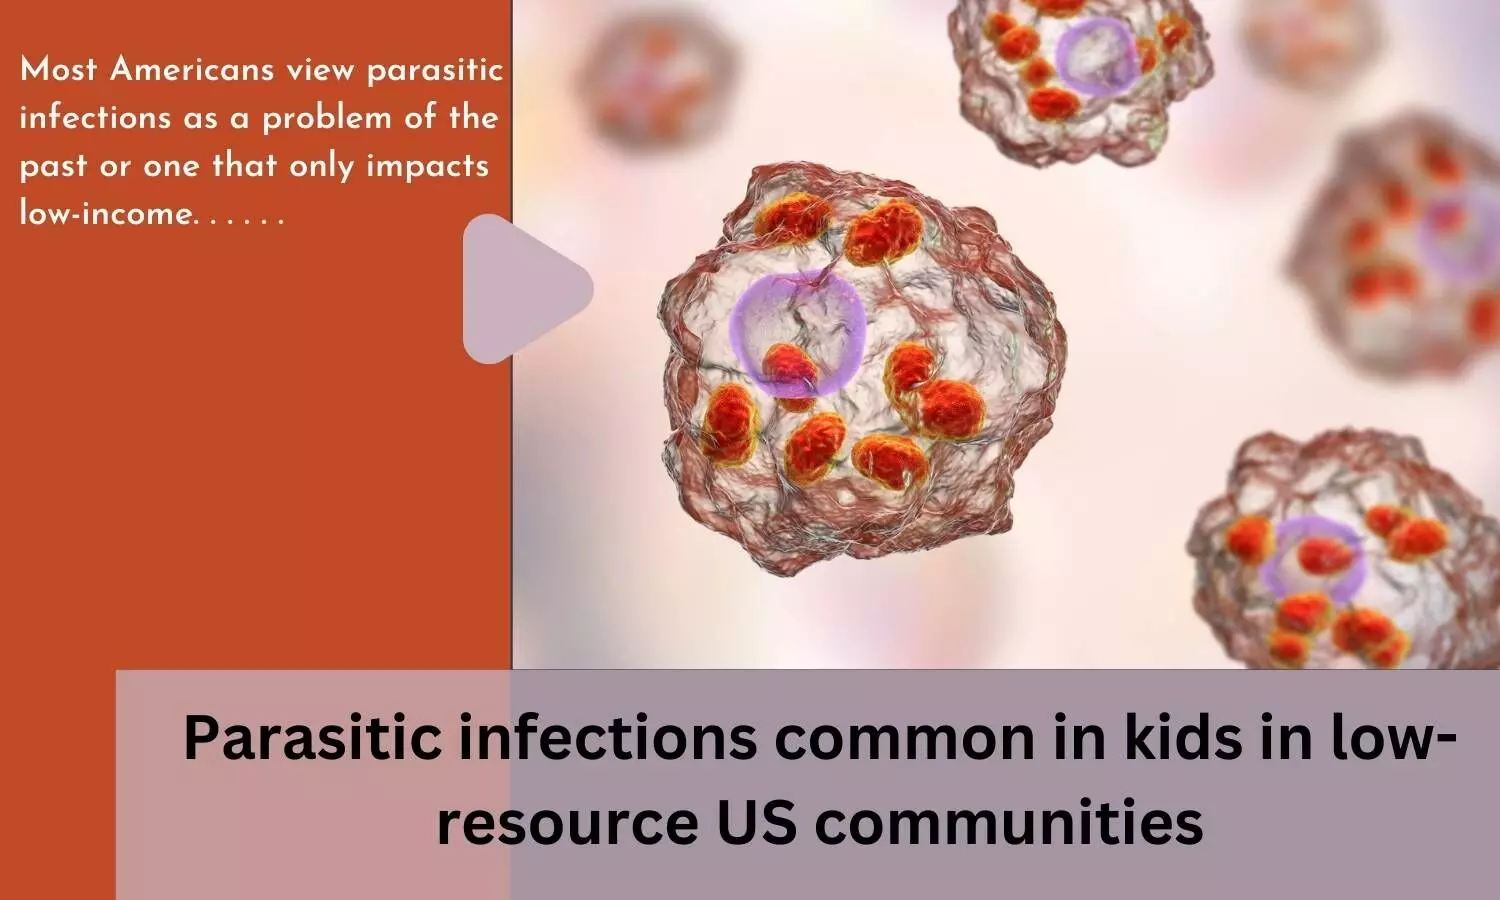 Parasitic infections common in kids in low-resource US communities